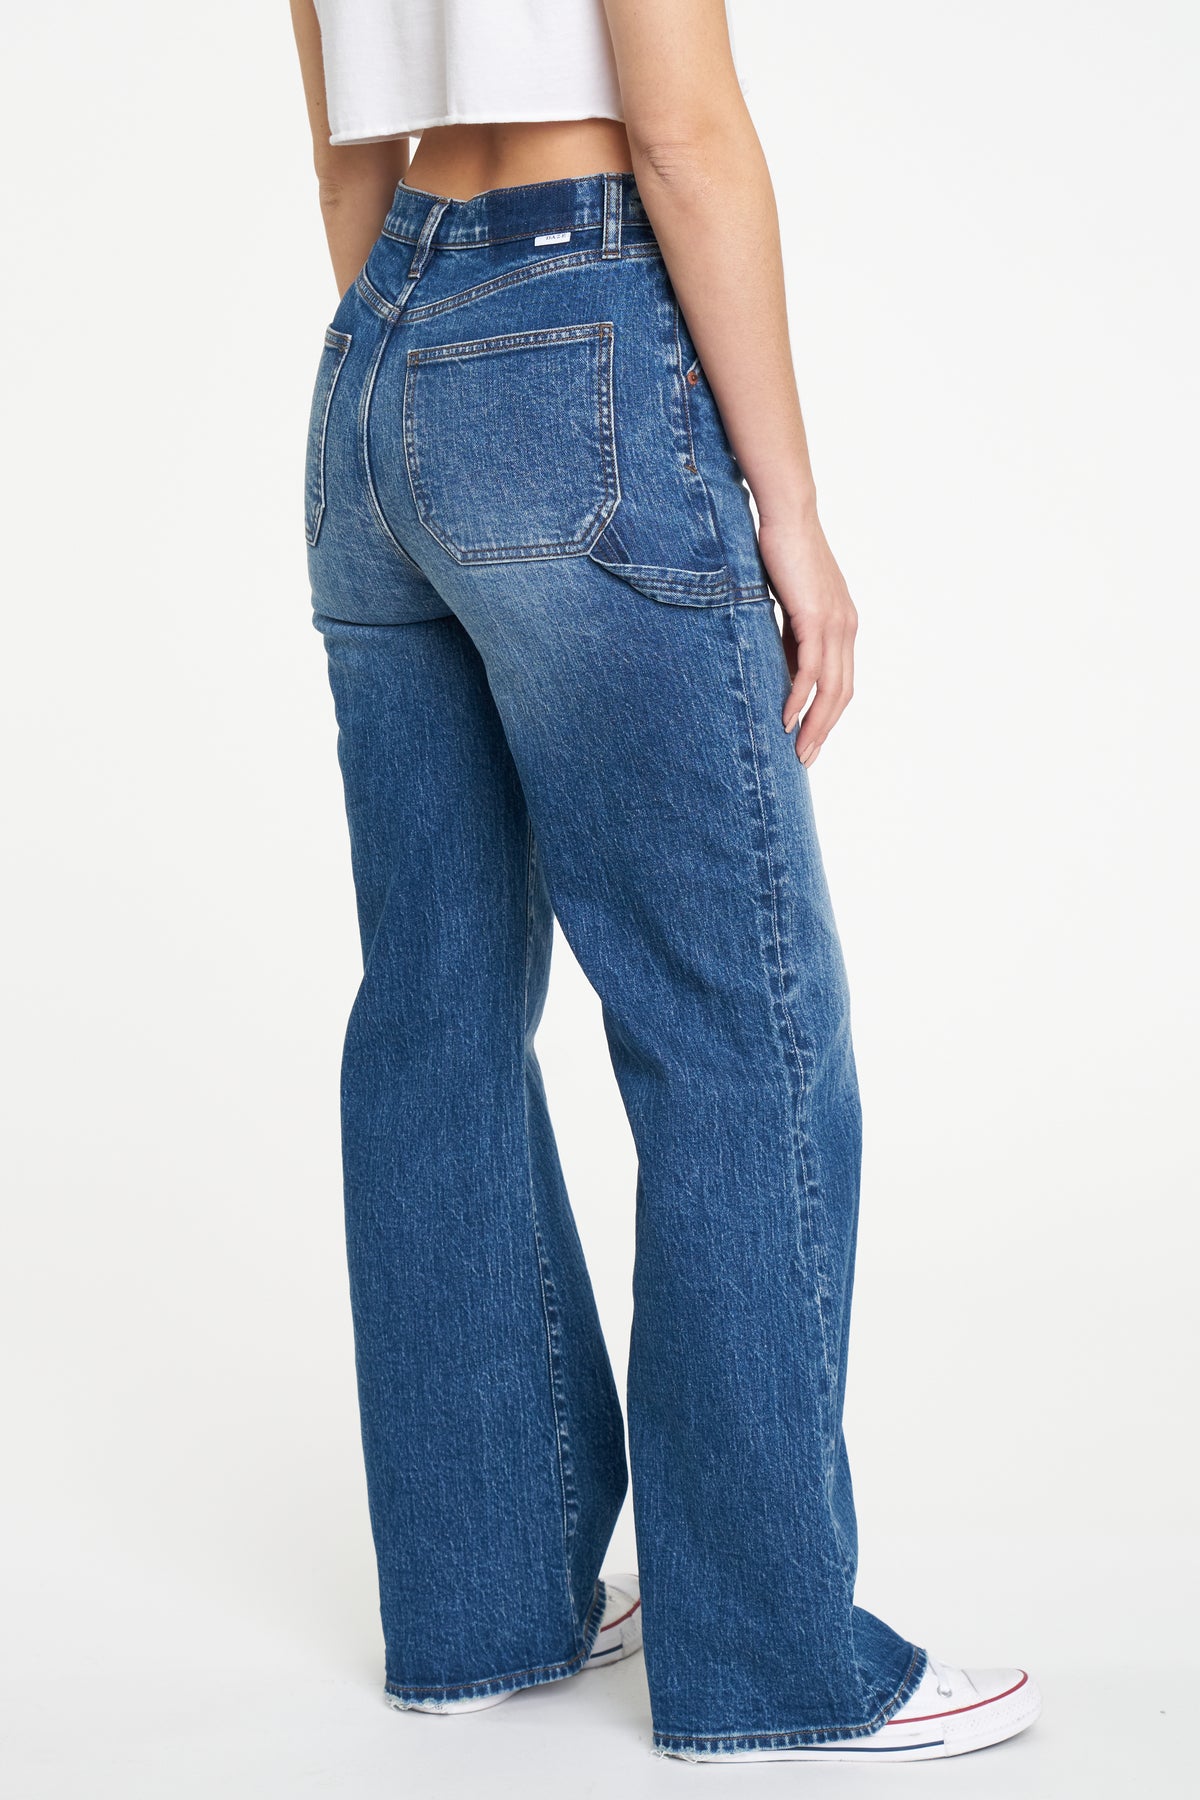 Far Out Patchpocket High Rise in Play Date – Daze Denim